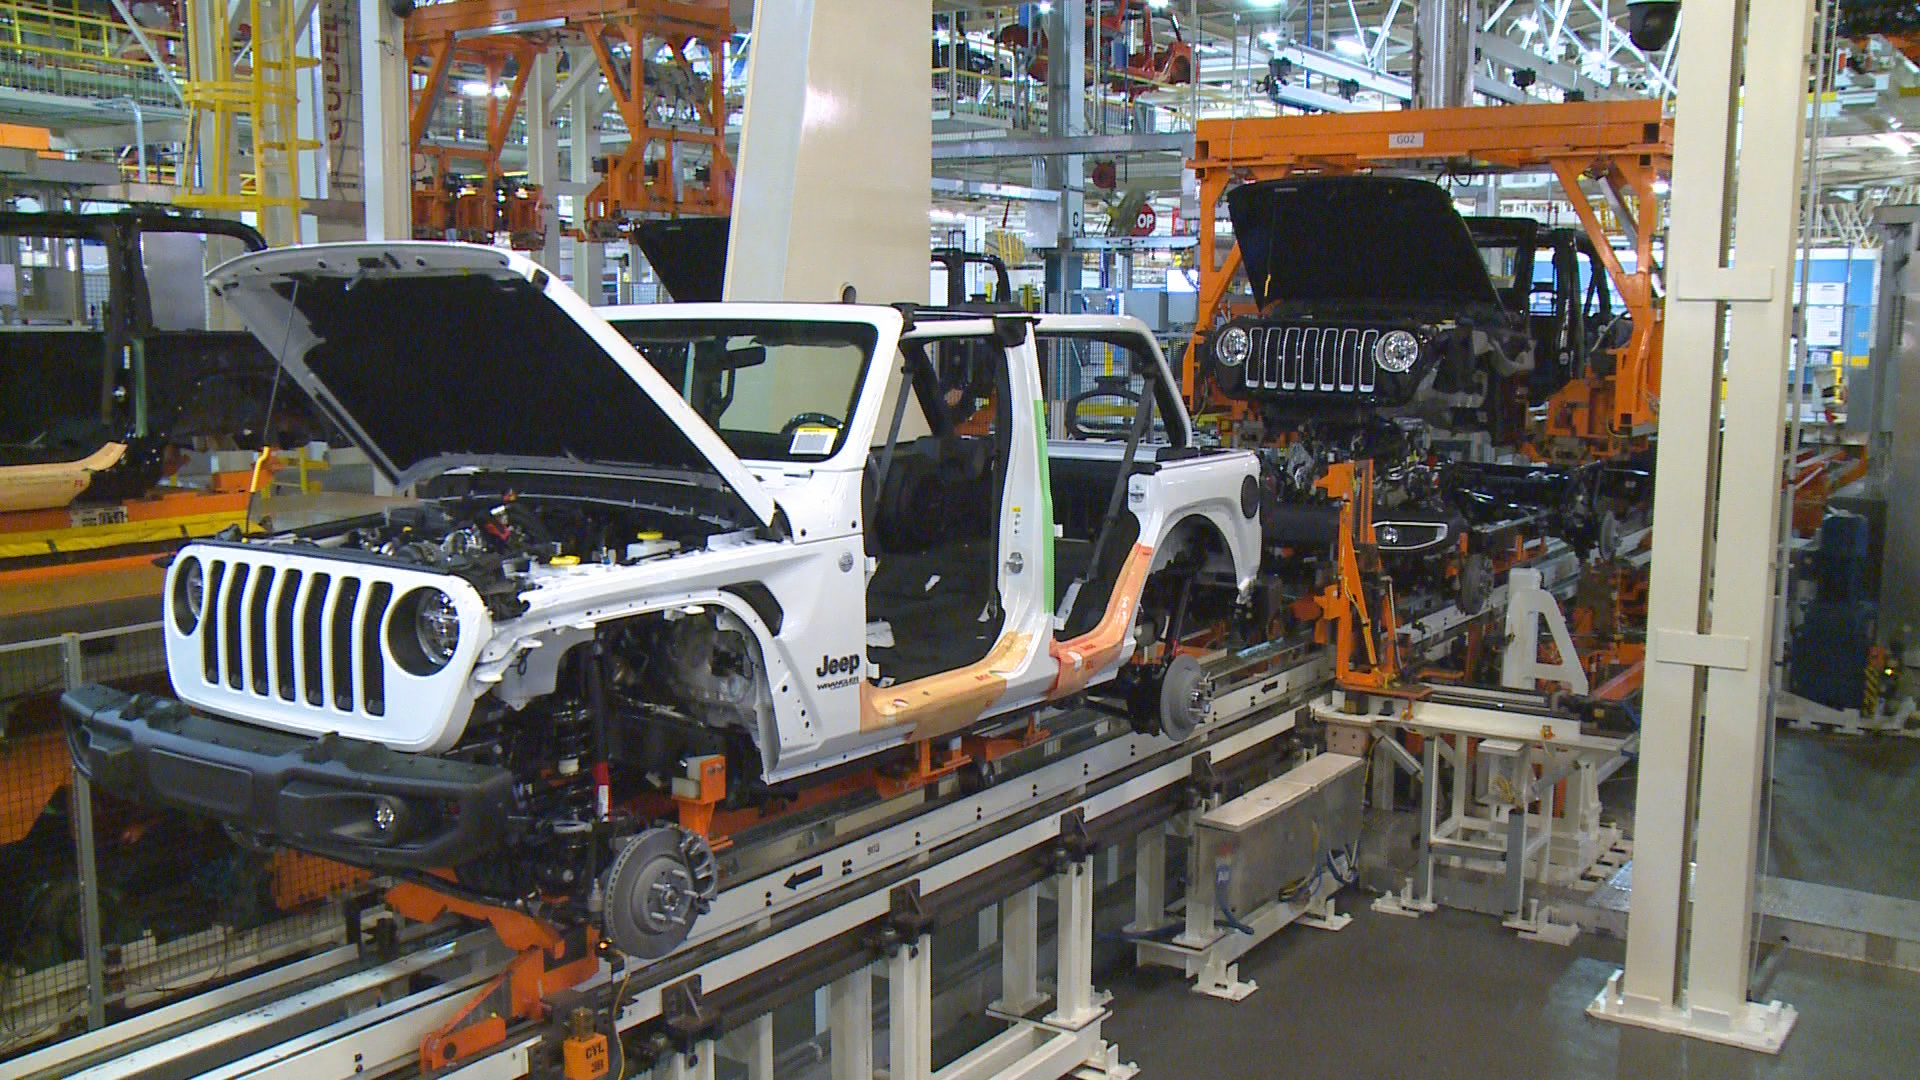 First look at Jeep production lines inside the Toledo Assembly Complex